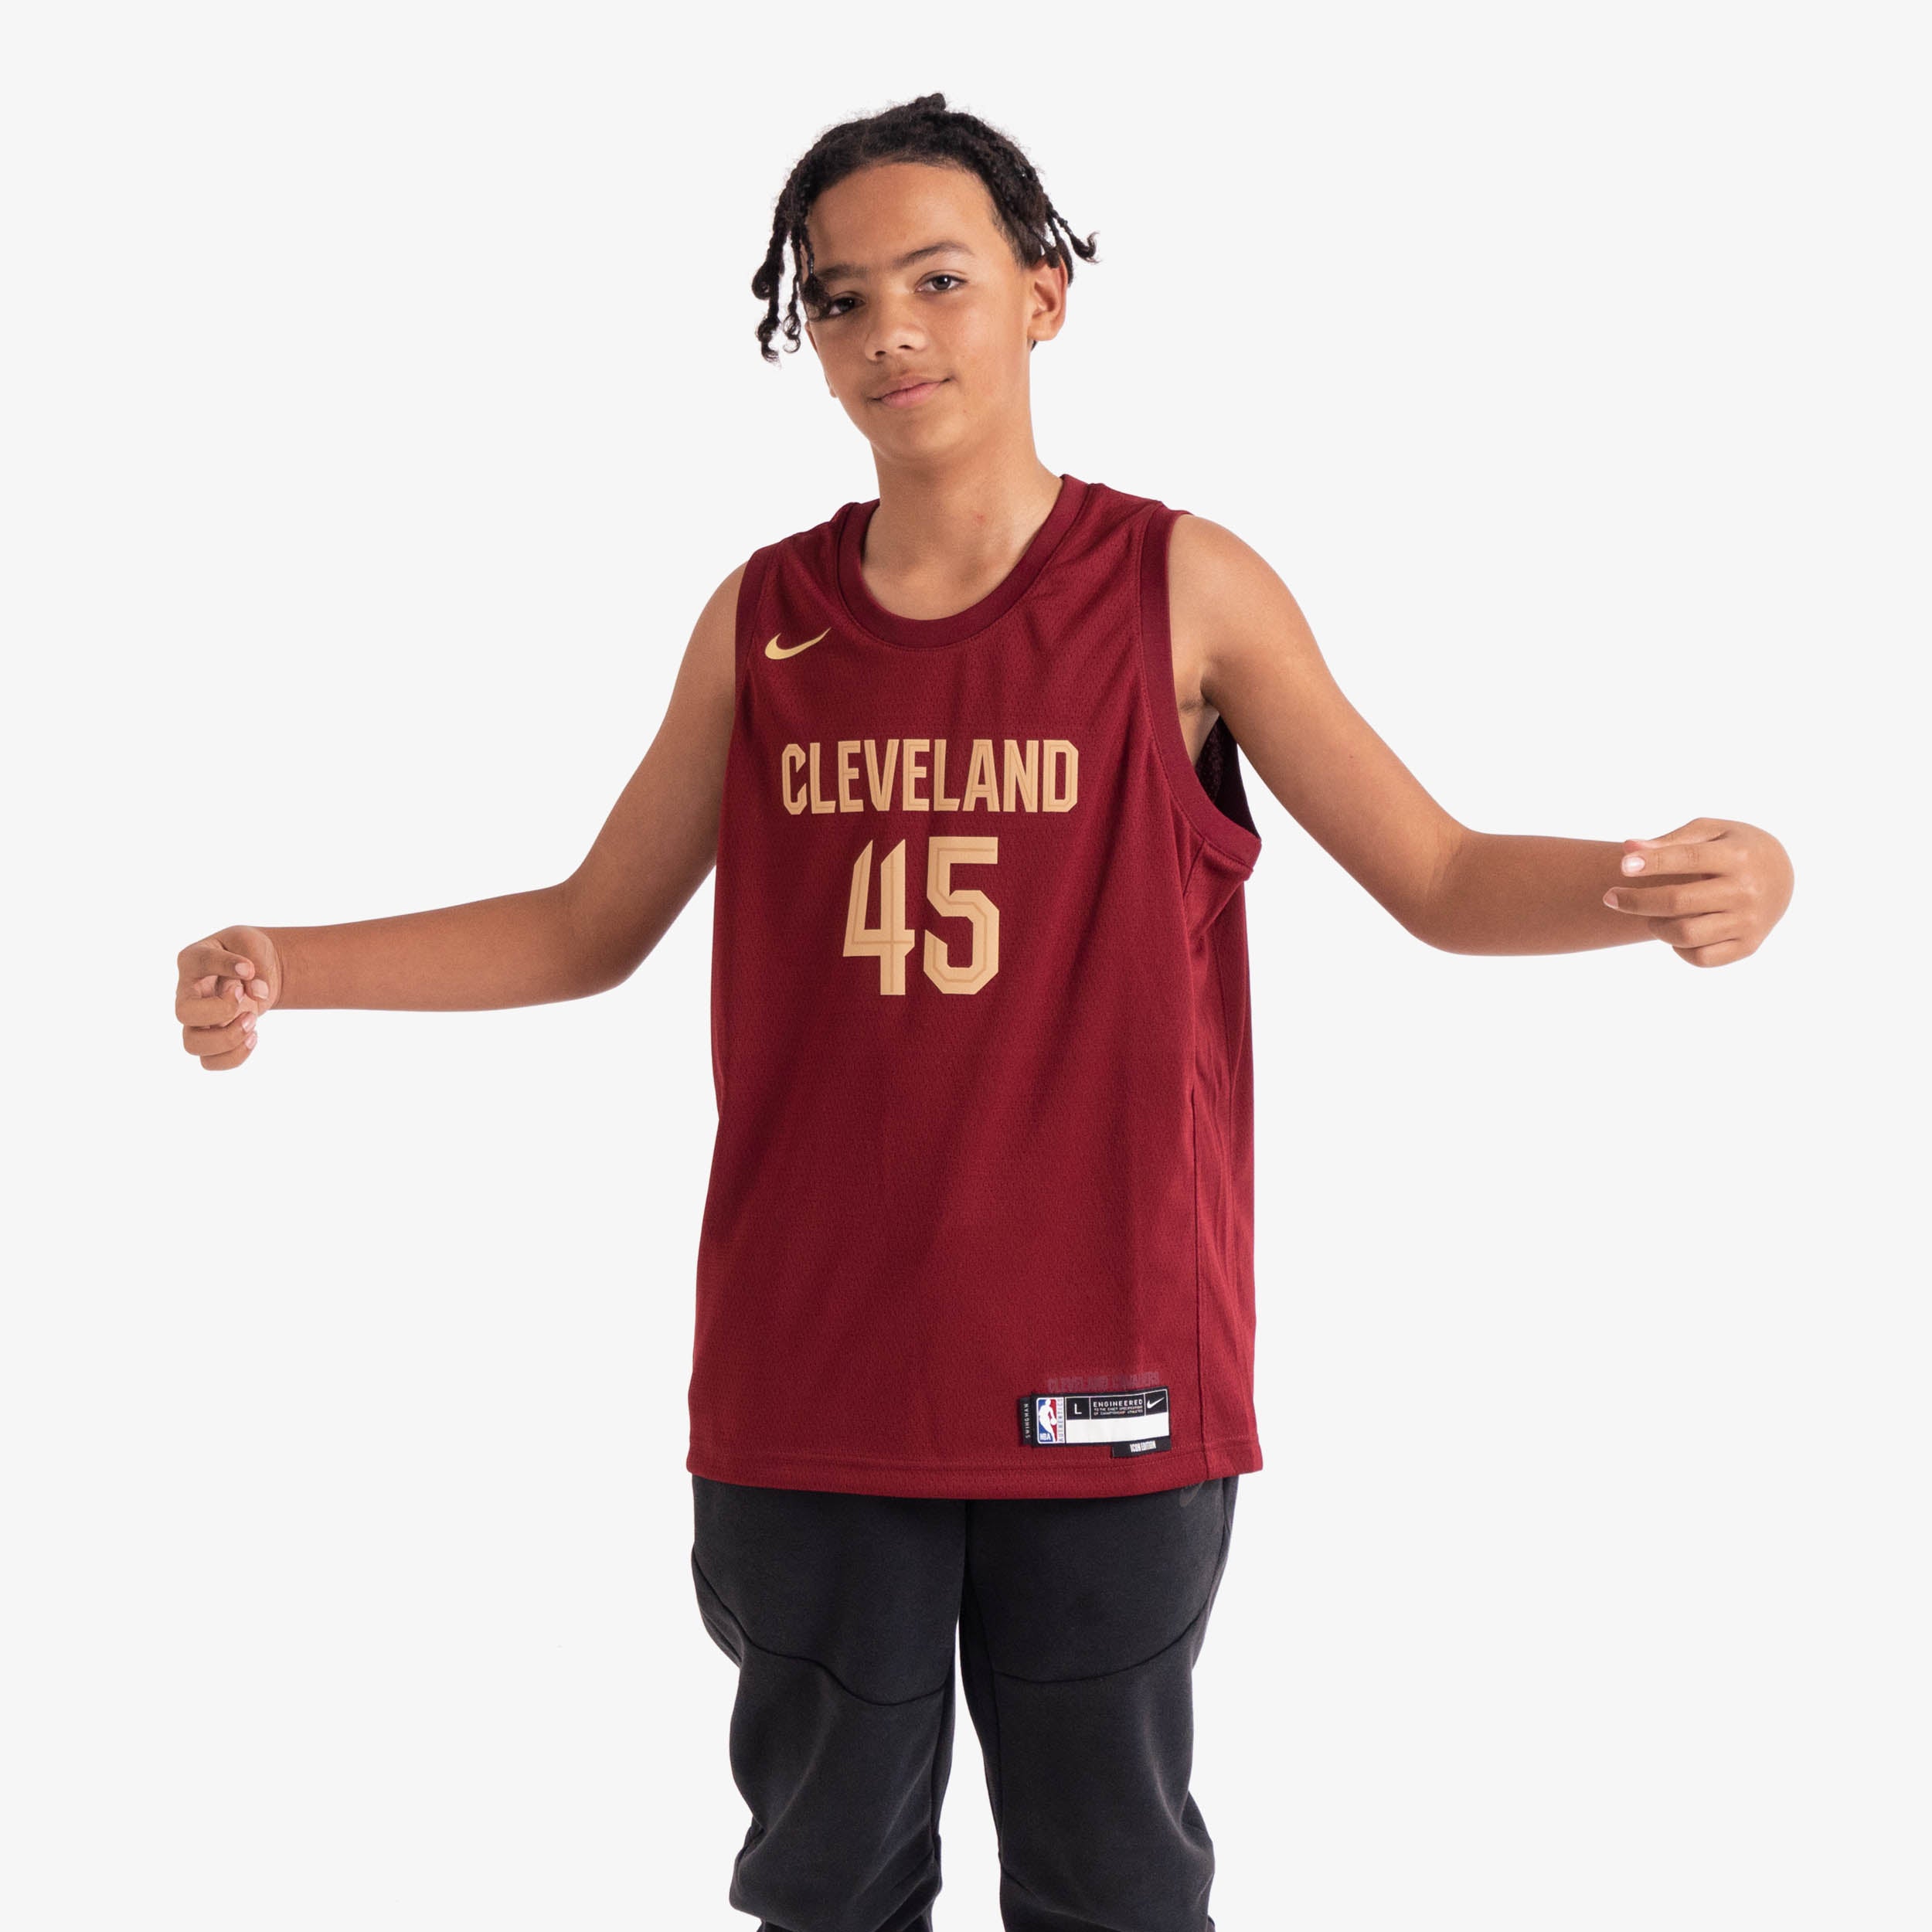 Donovan Mitchell Cleveland Cavaliers Icon Edition Youth Swingman